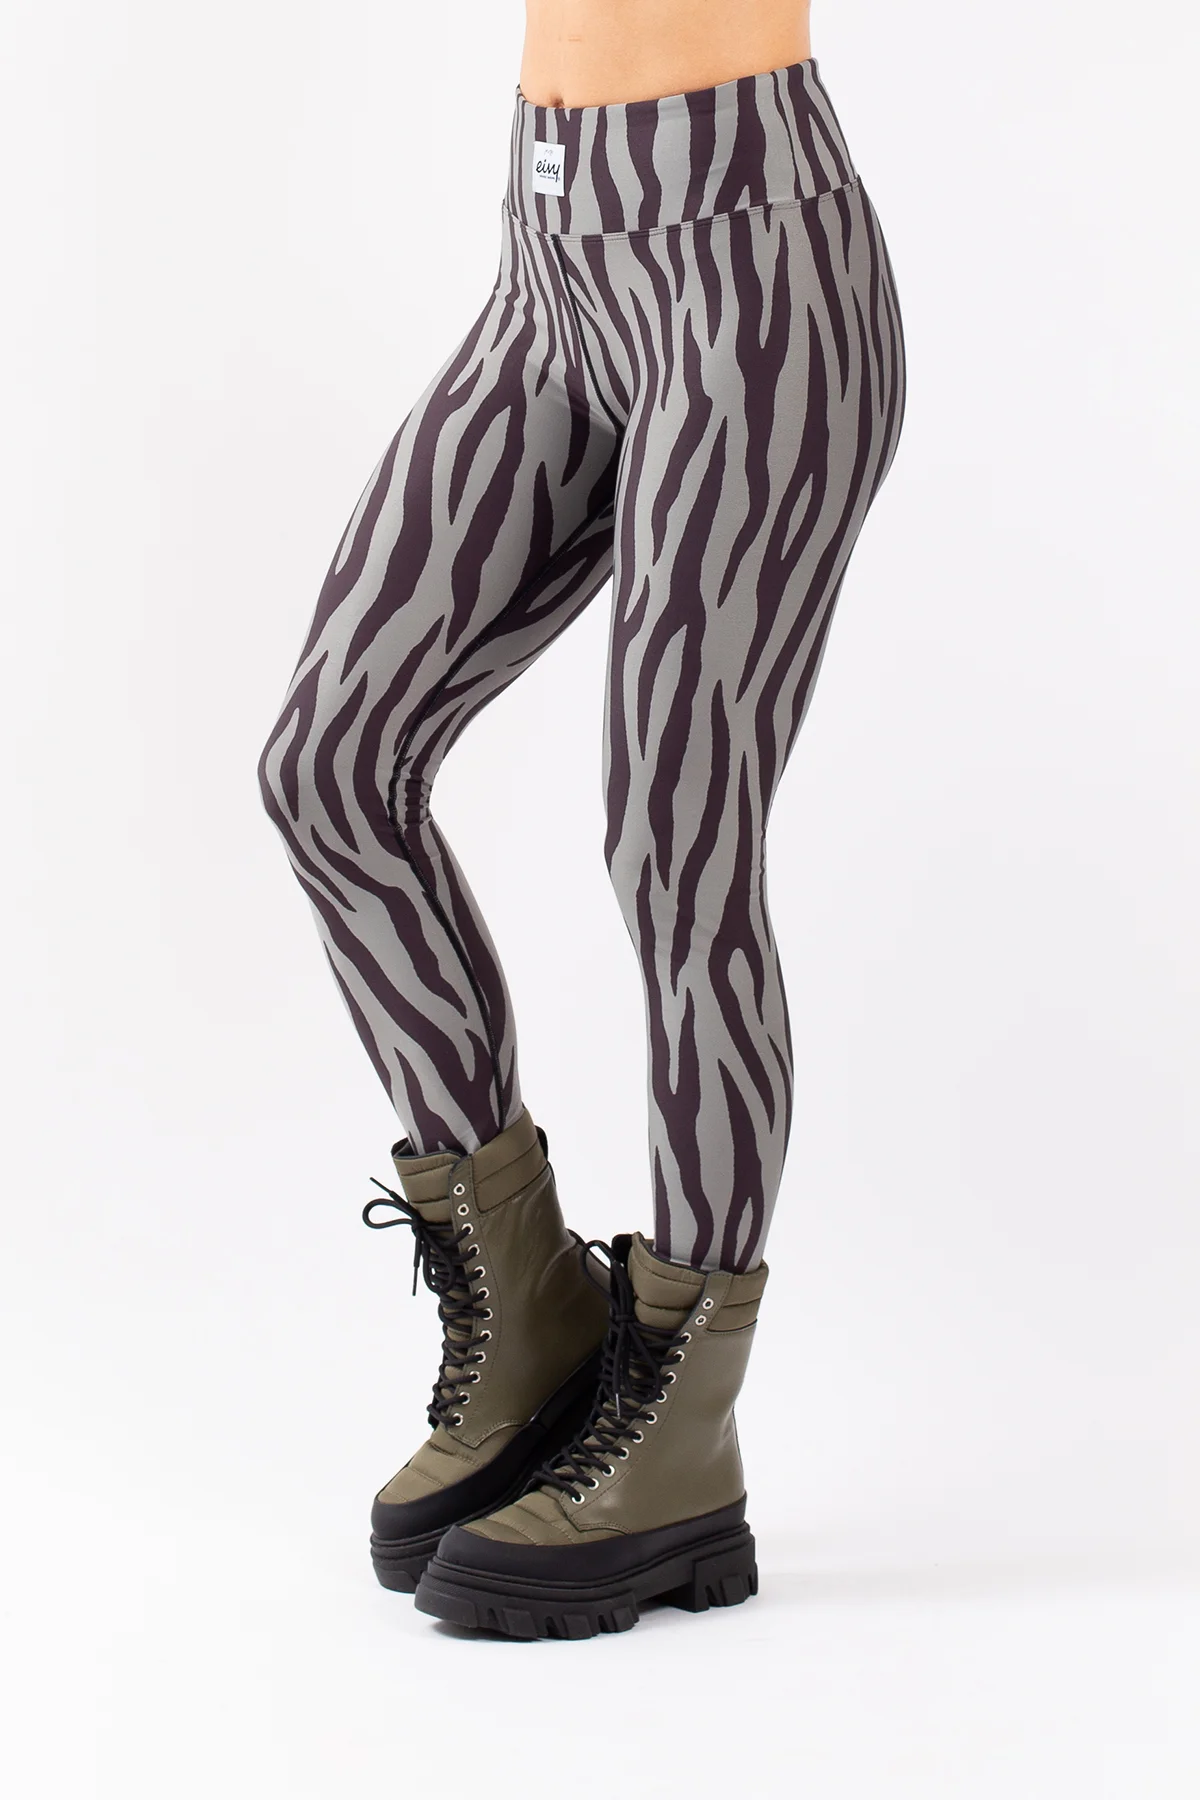 Eivy Ice Cold base layer leggings in snow leopard Exclusive at ASOS